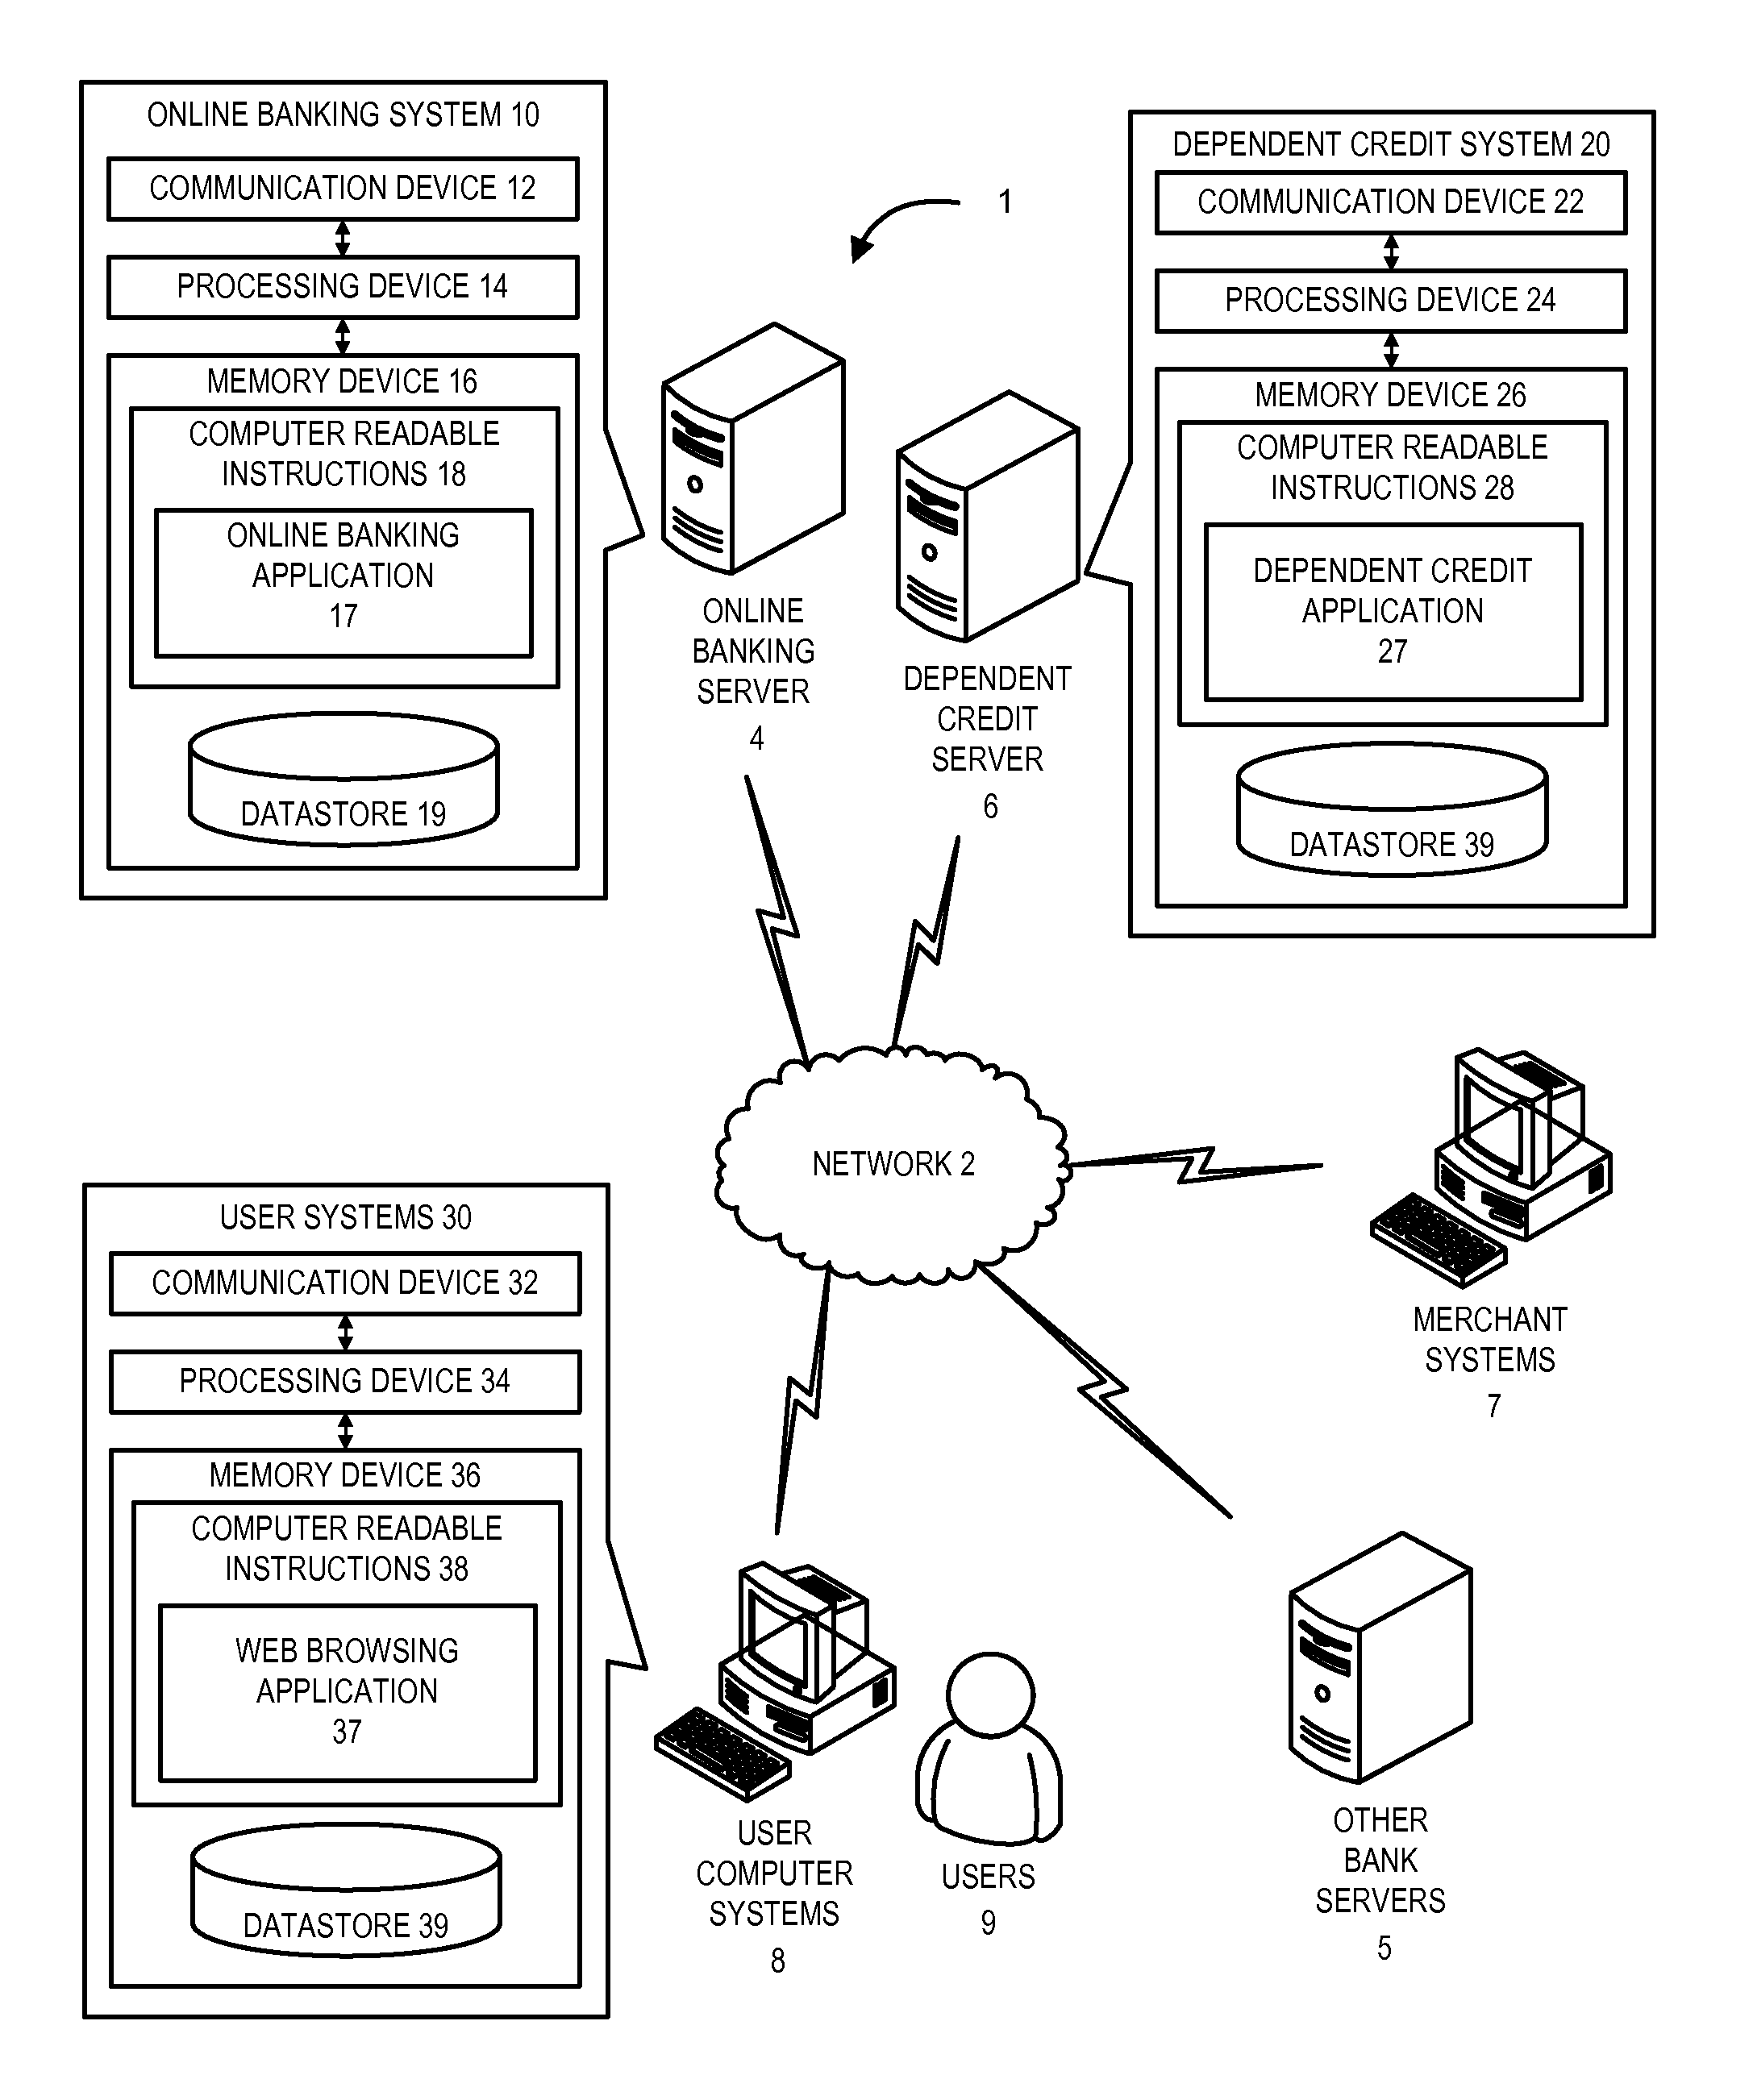 Dependent payment device